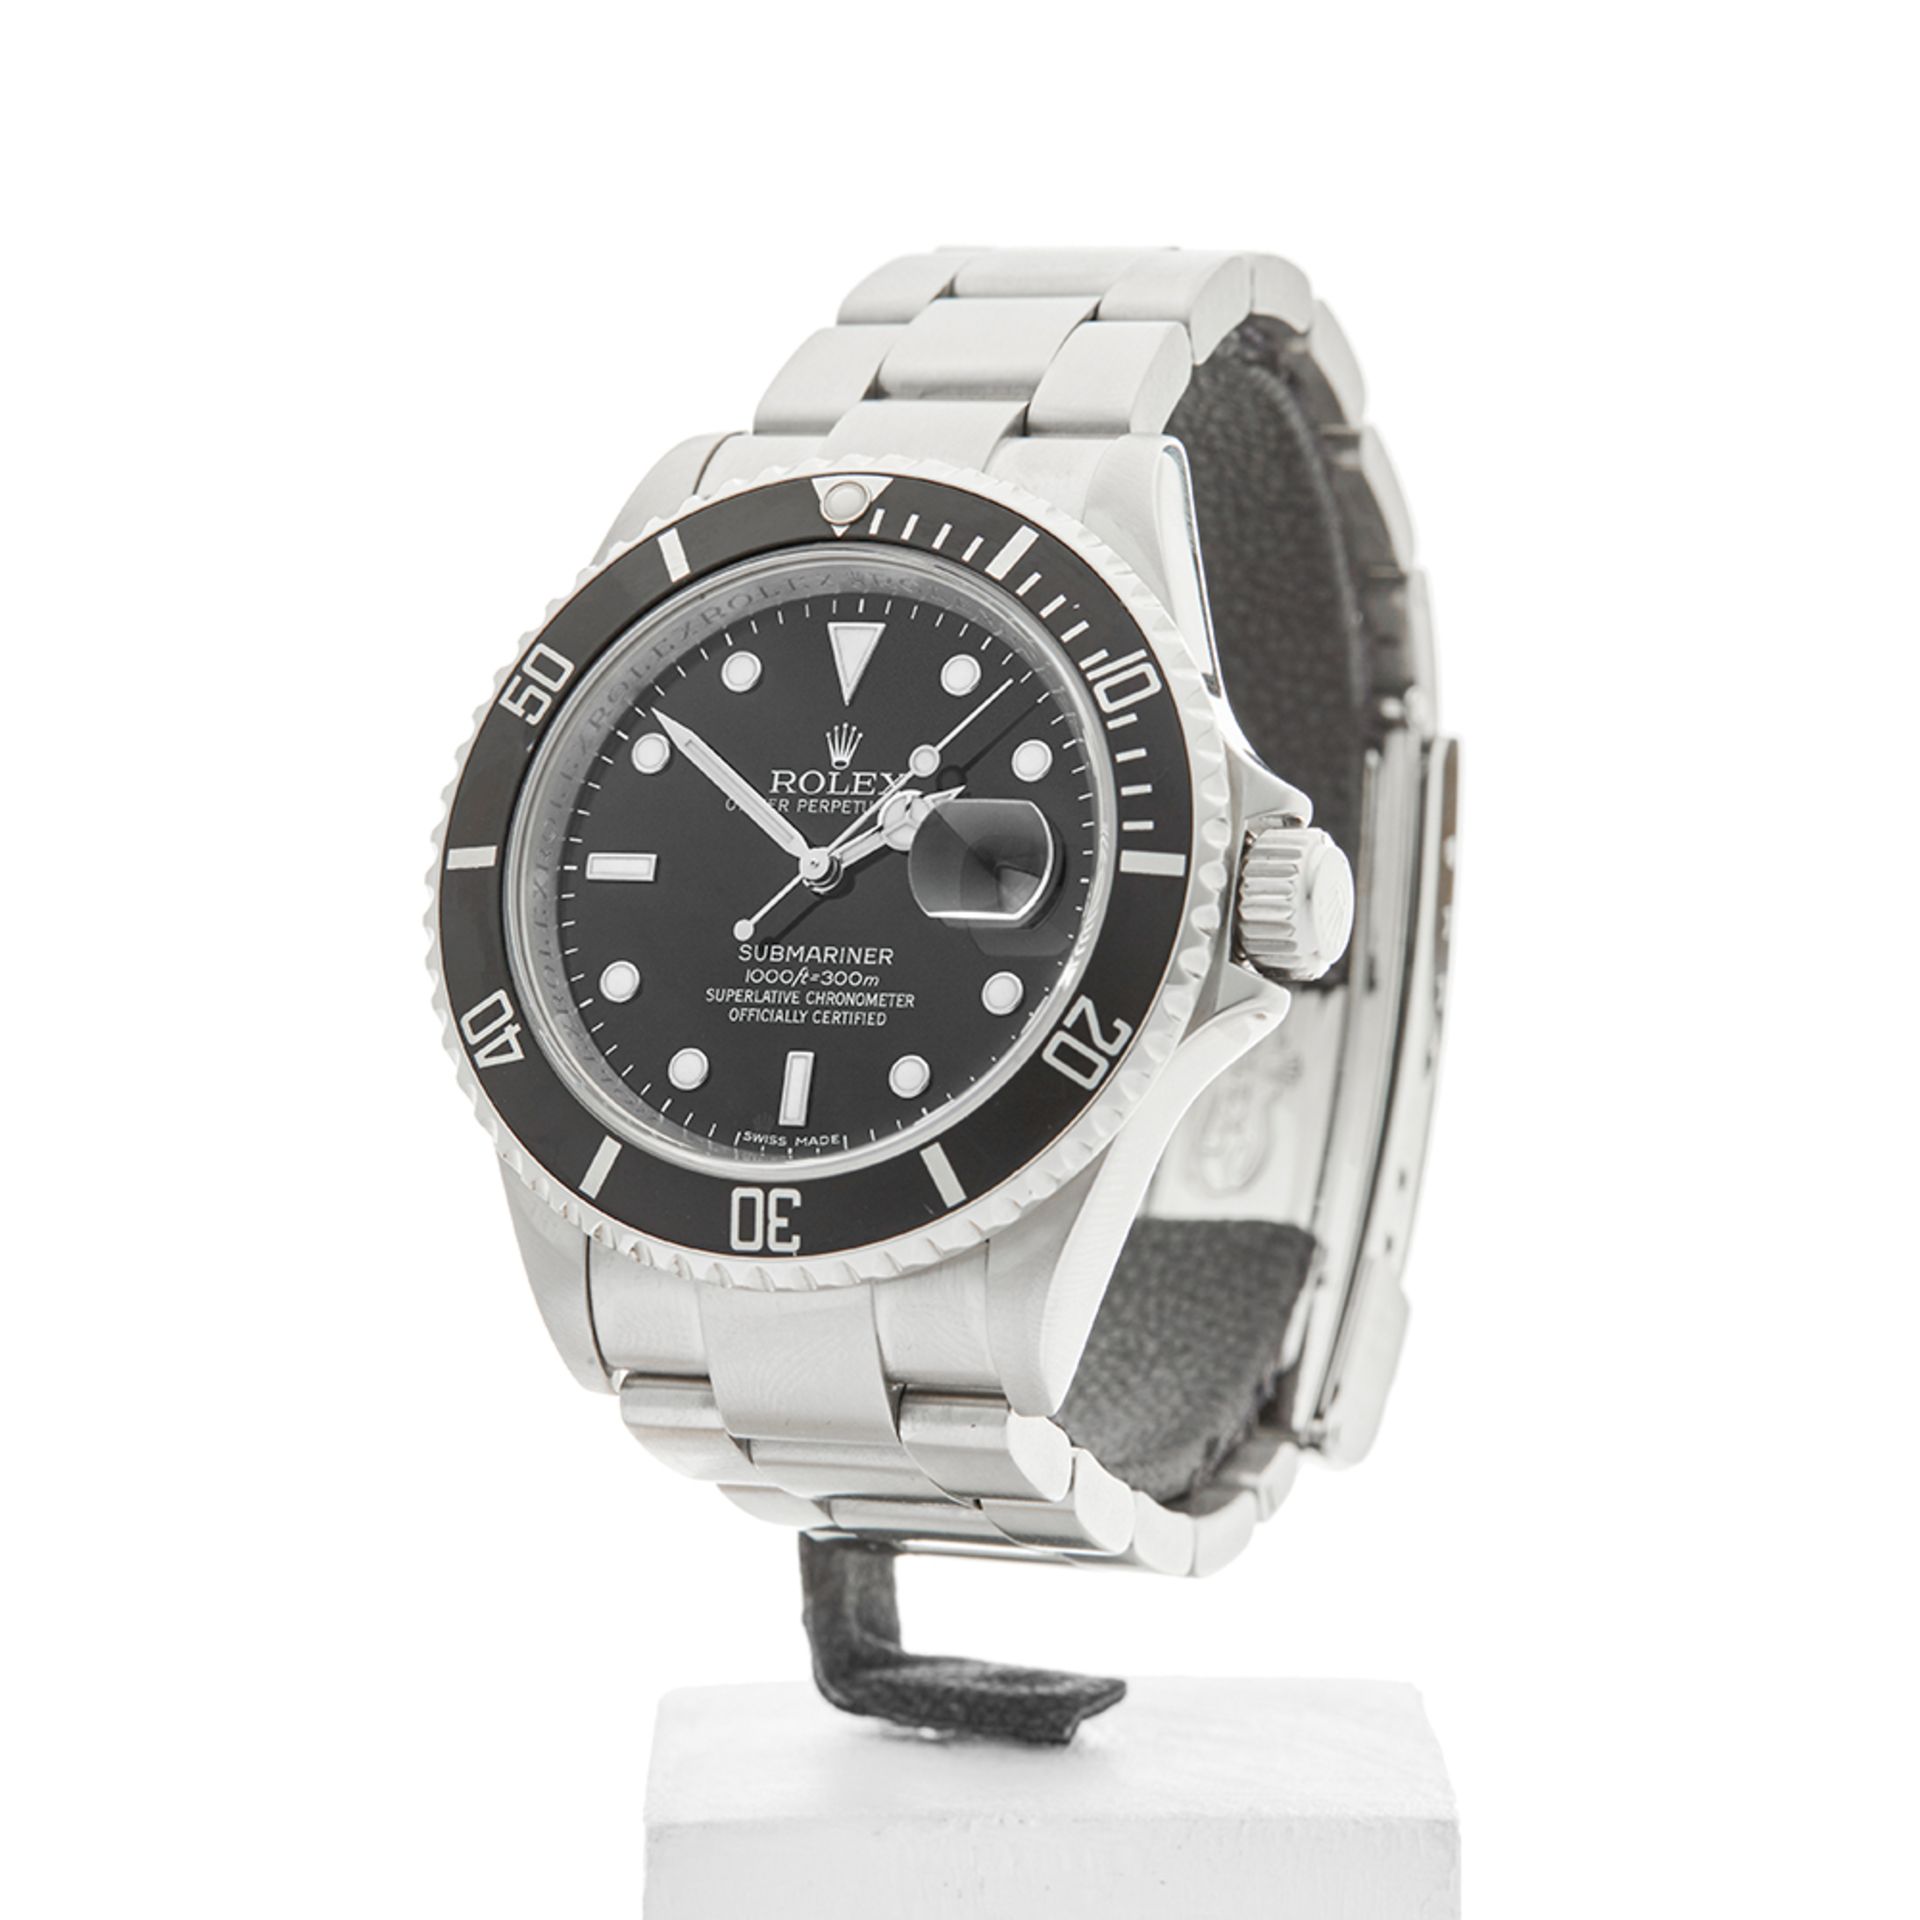 W3946 Submariner 40mm Stainless Steel - 16610